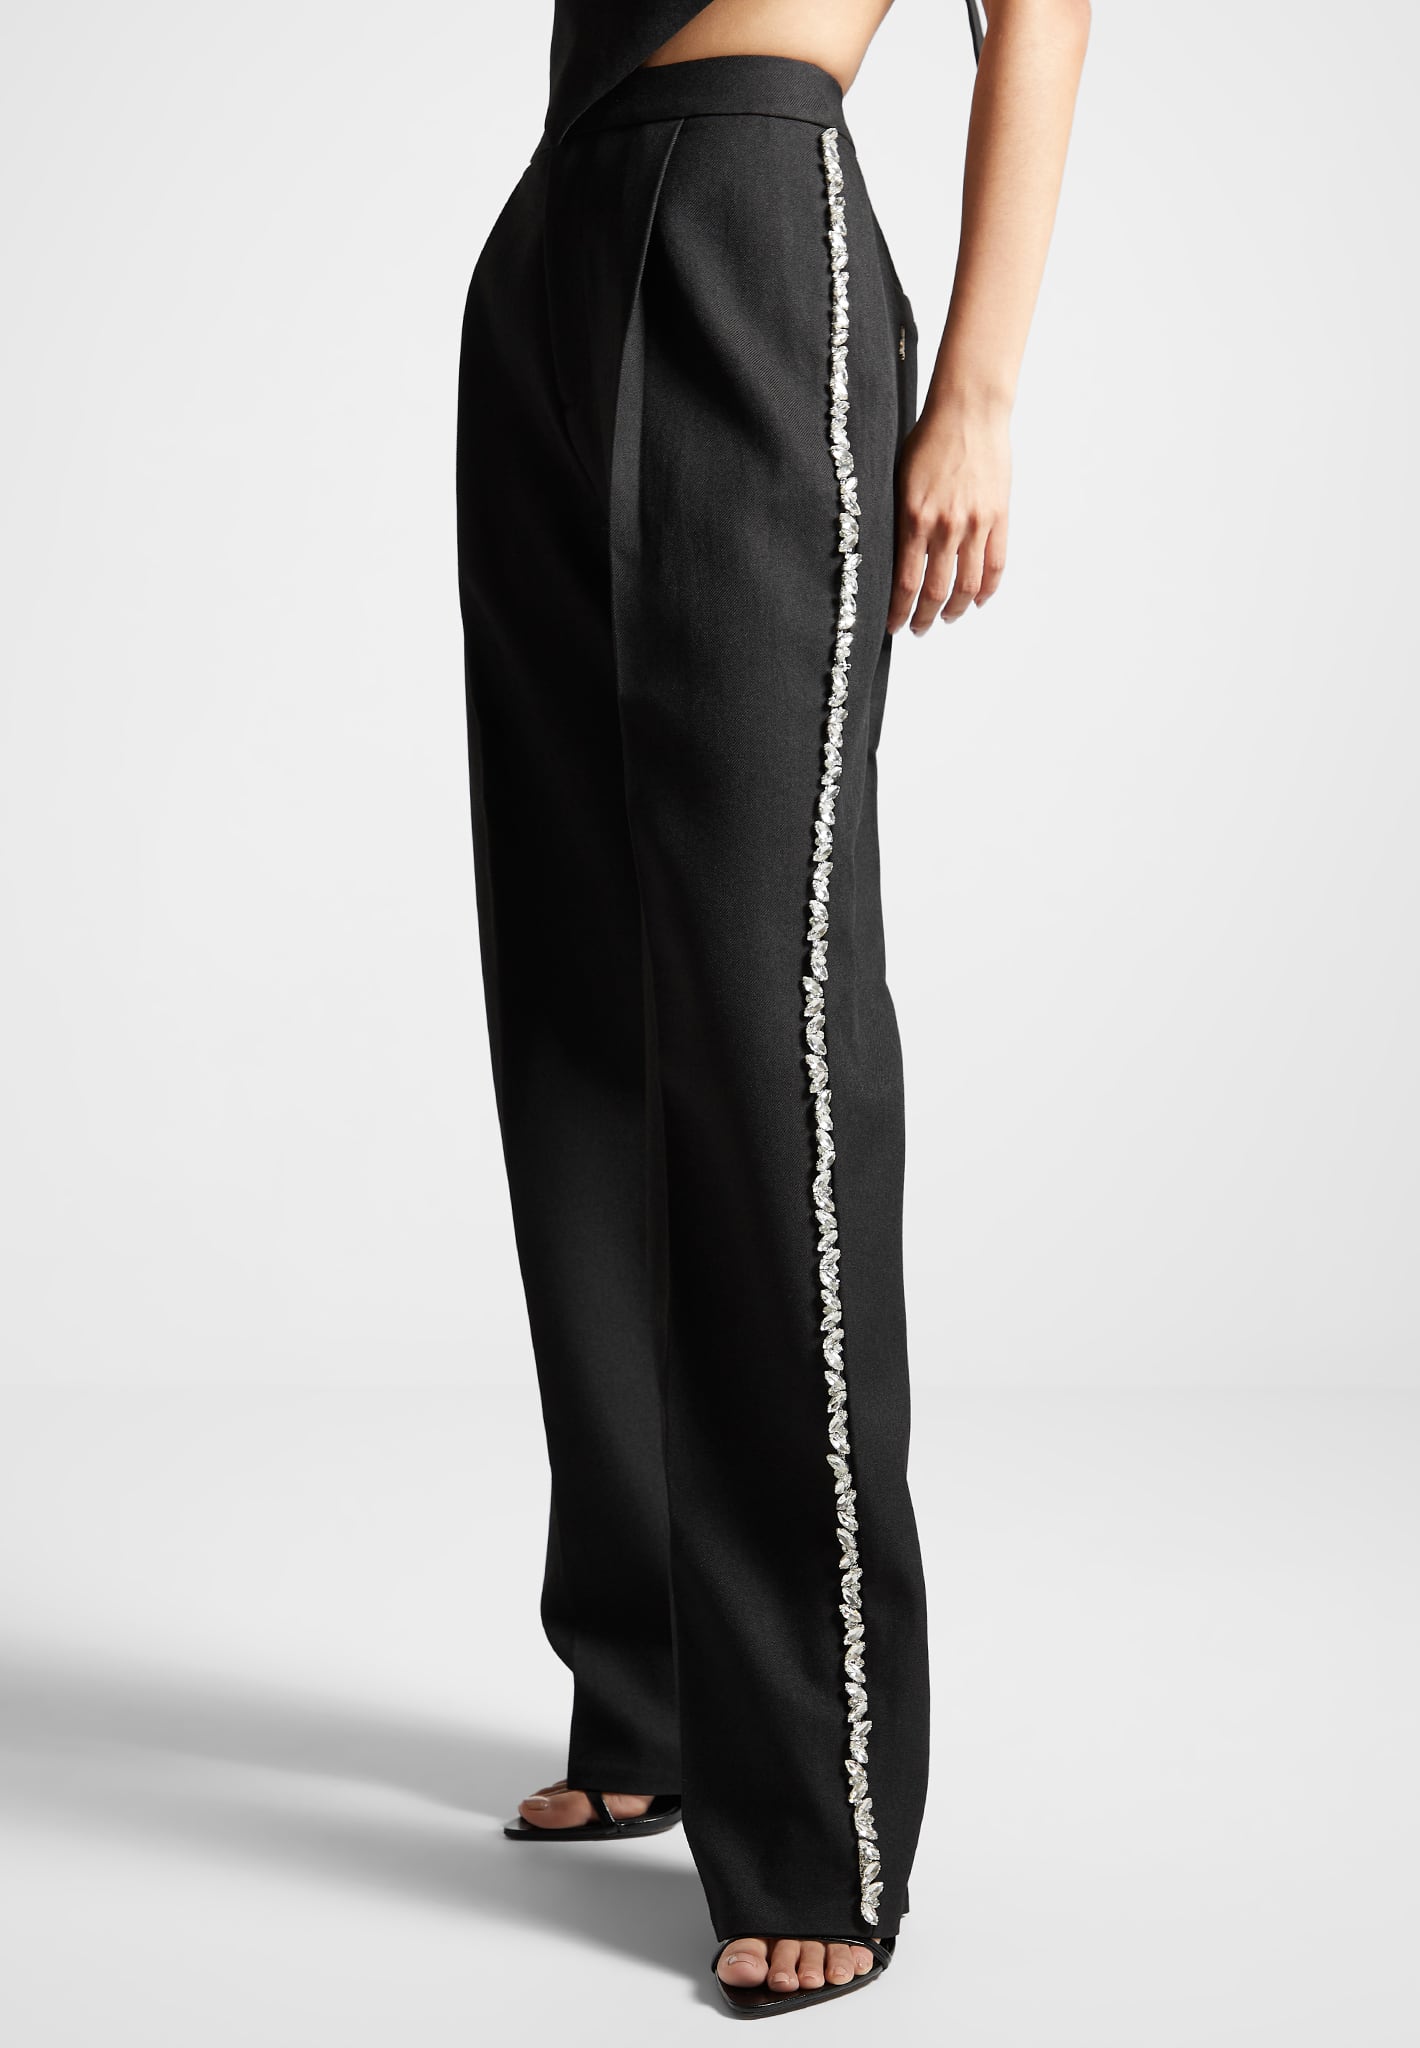 Lorcan Pants - High Waisted Tailored Pants in White | Showpo USA